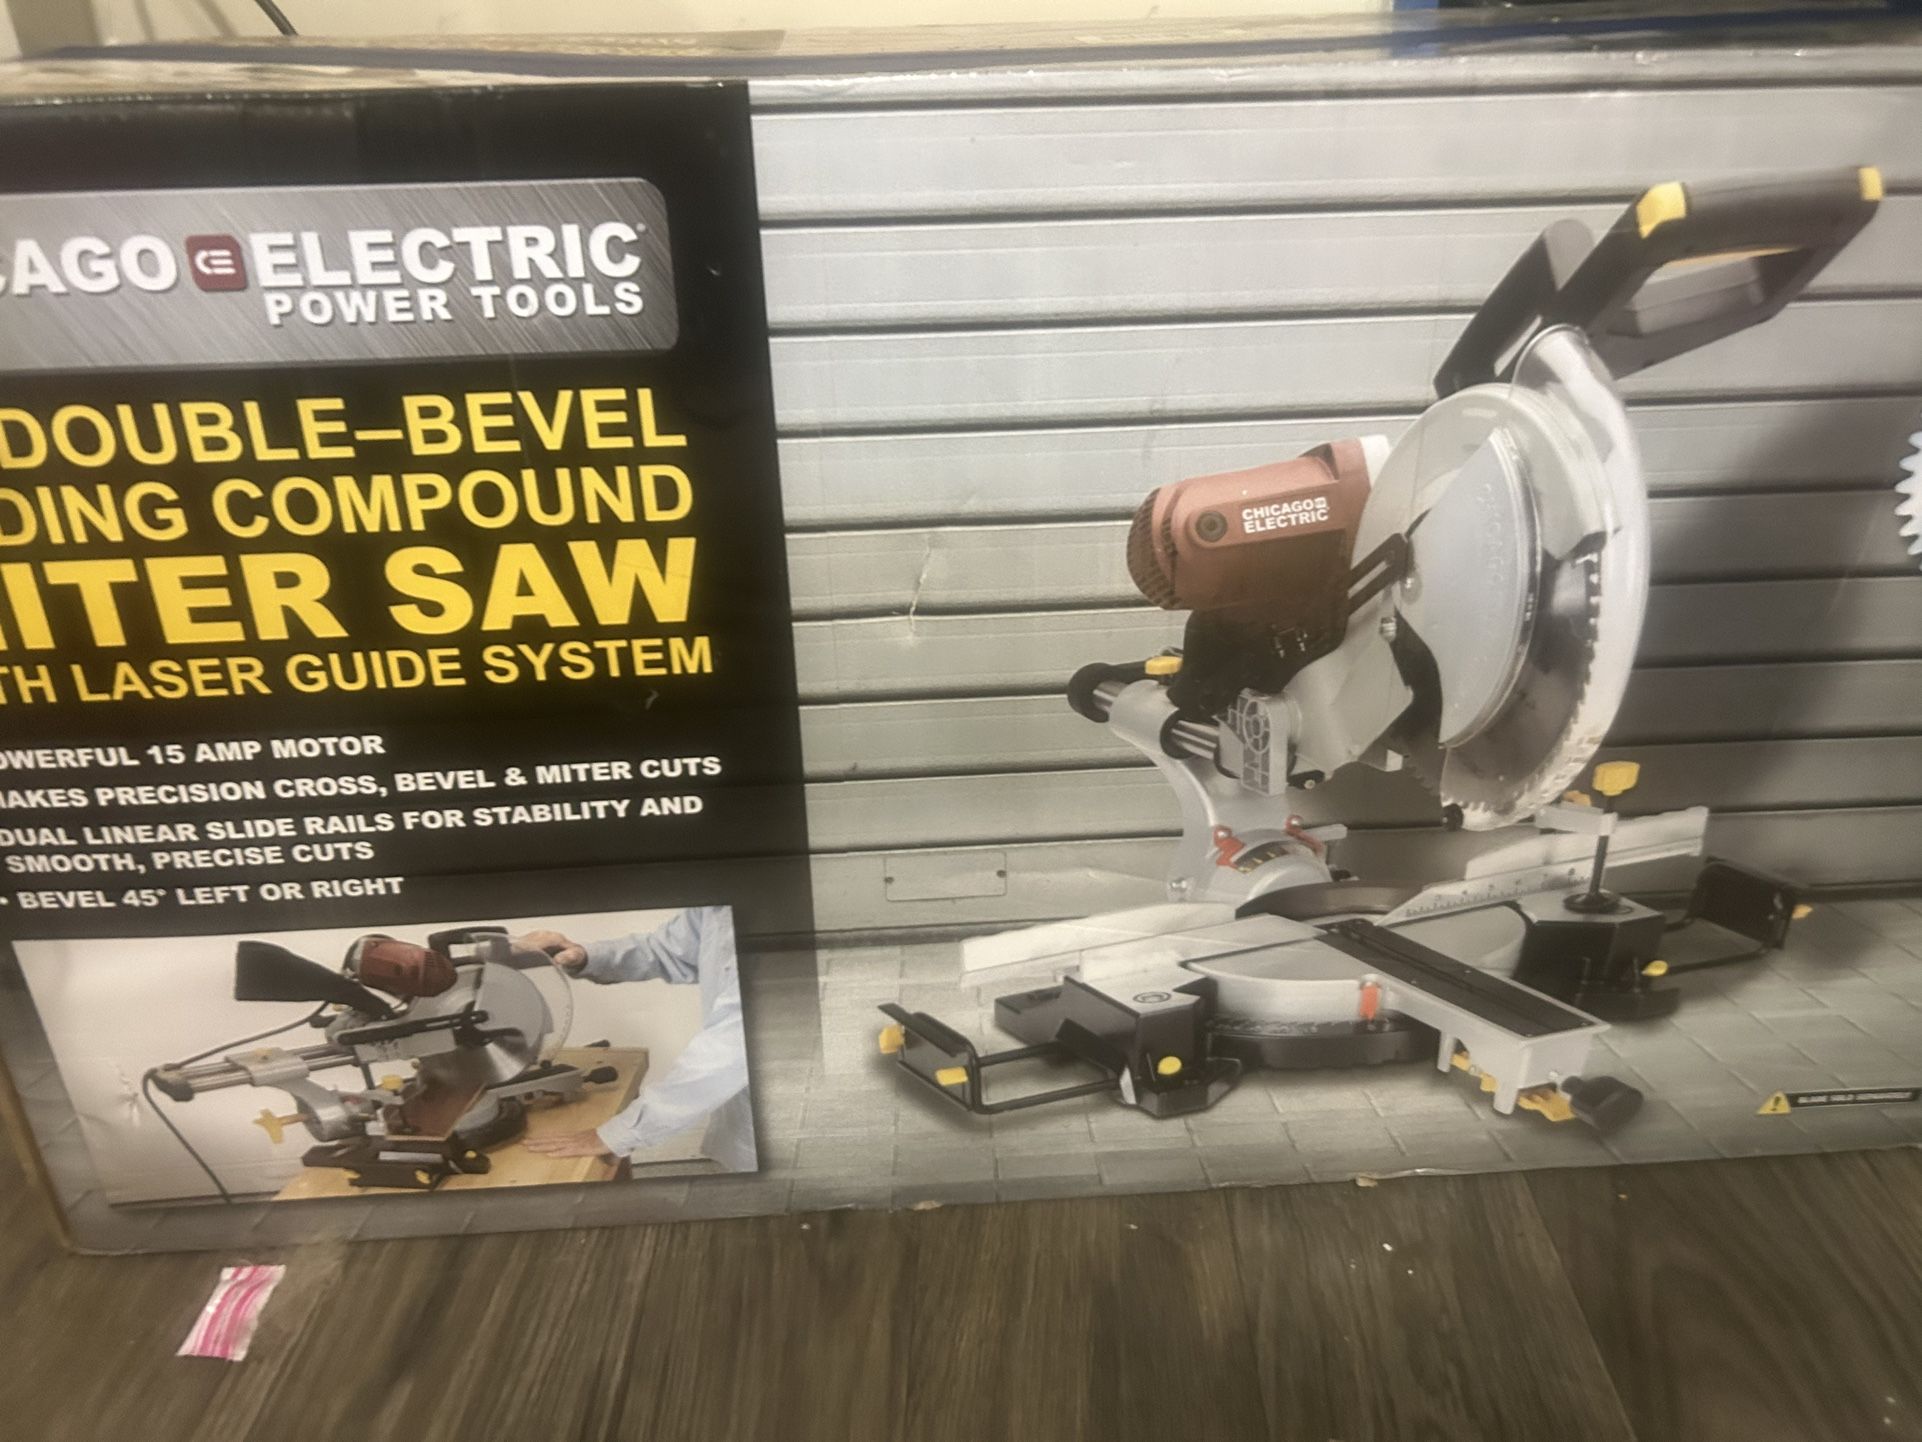 Chicago electric 12" Double beve sliding compound miter saw with laser guide system